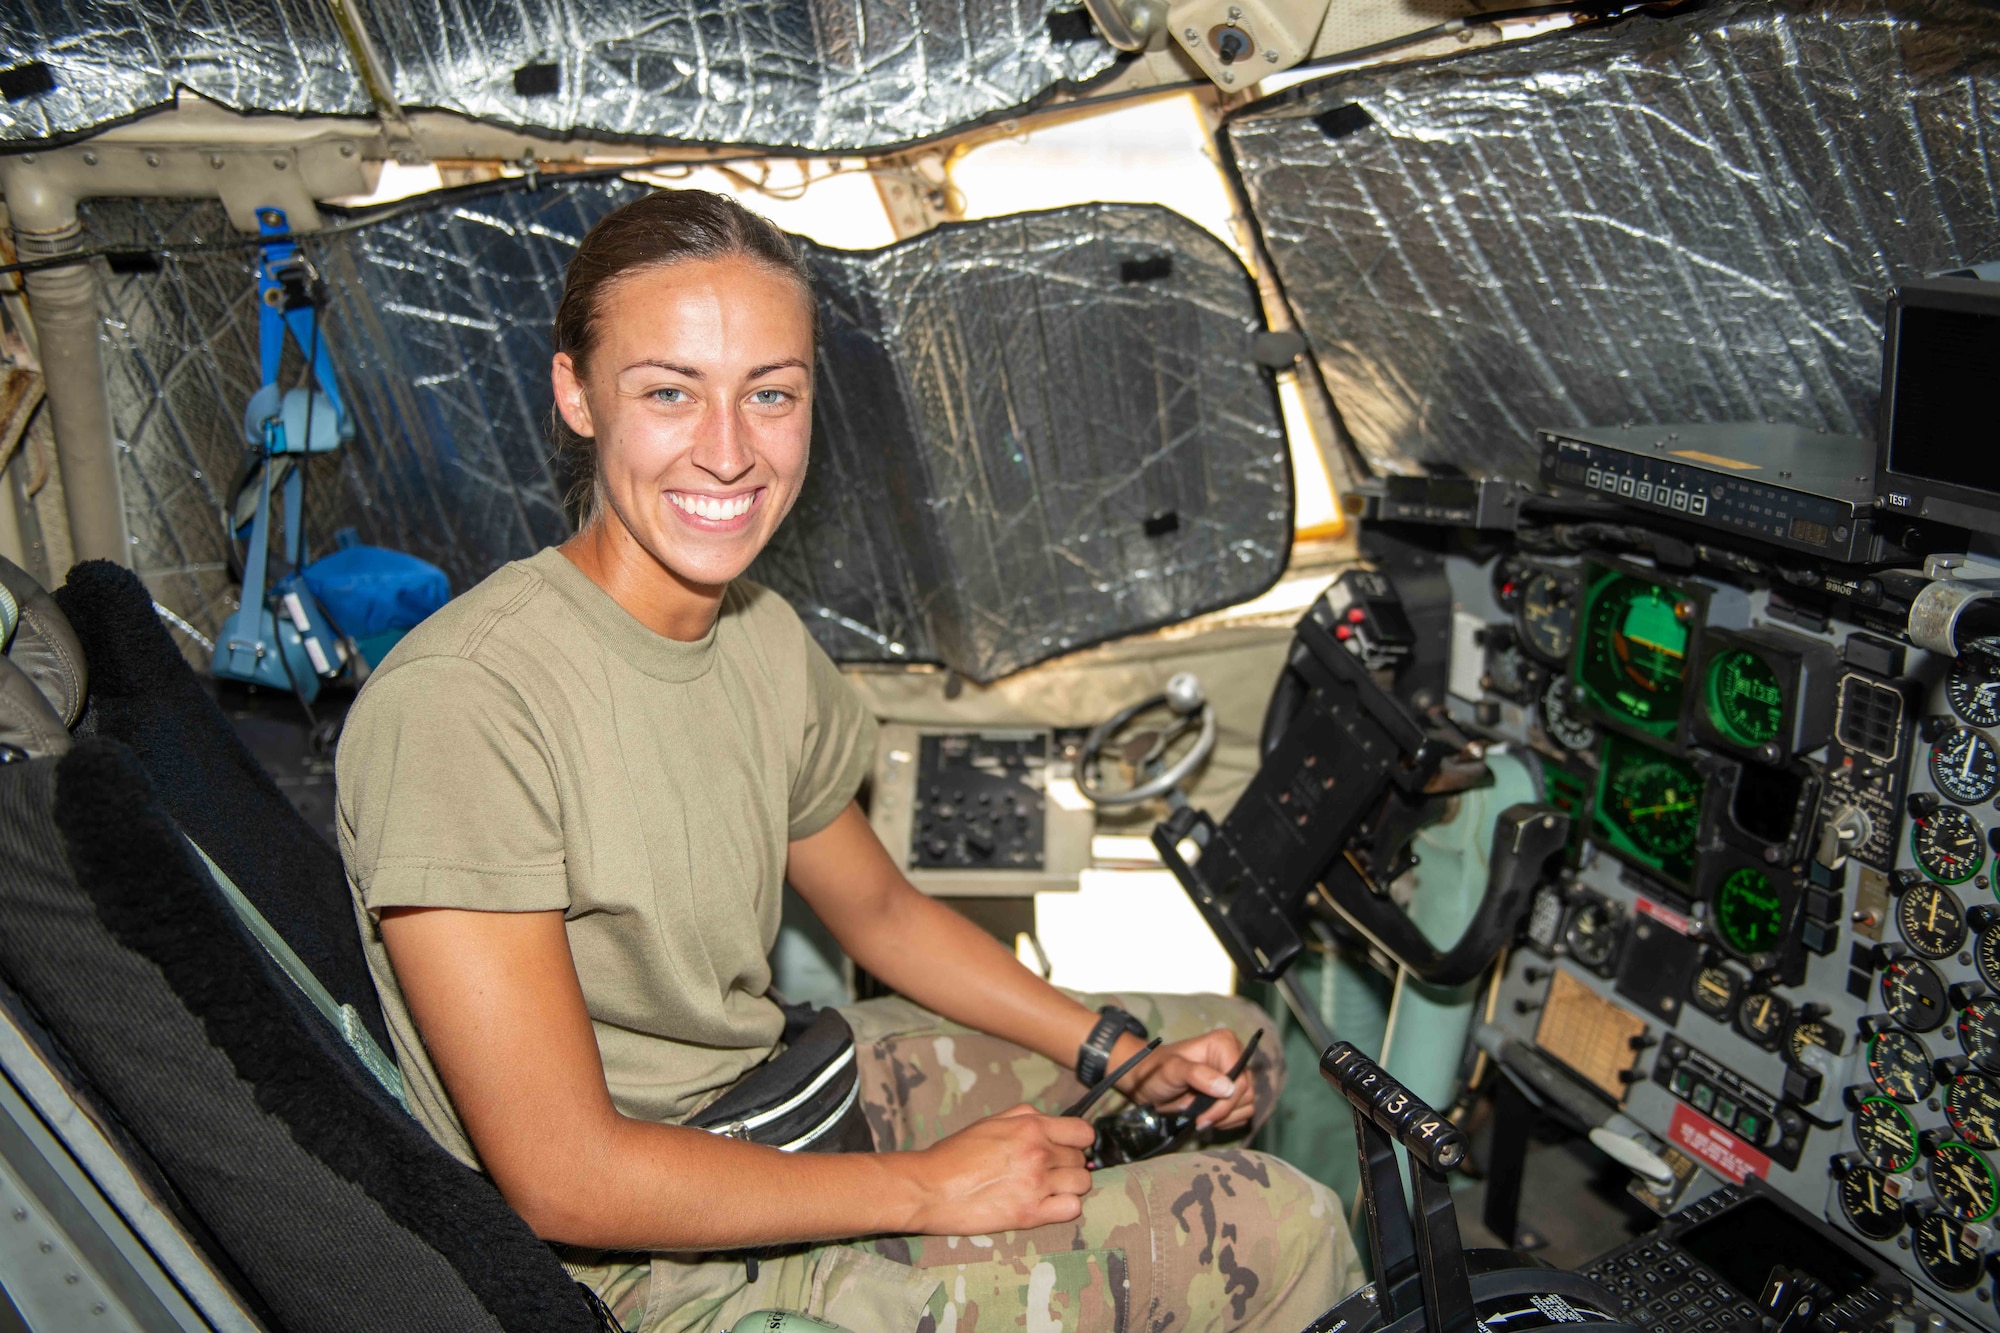 U.S. Air Force Reserve Staff Sgt. Sydnie Schwenk, an Airman from Youngstown, Ohio, currently deployed to Camp Lemonnier, Djibouti, with the 75th Expeditionary Airlift Squadron "Rogue Squadron", conducts an inspection on a C-130 Hercules assigned to the squadron, May 3, 2022.